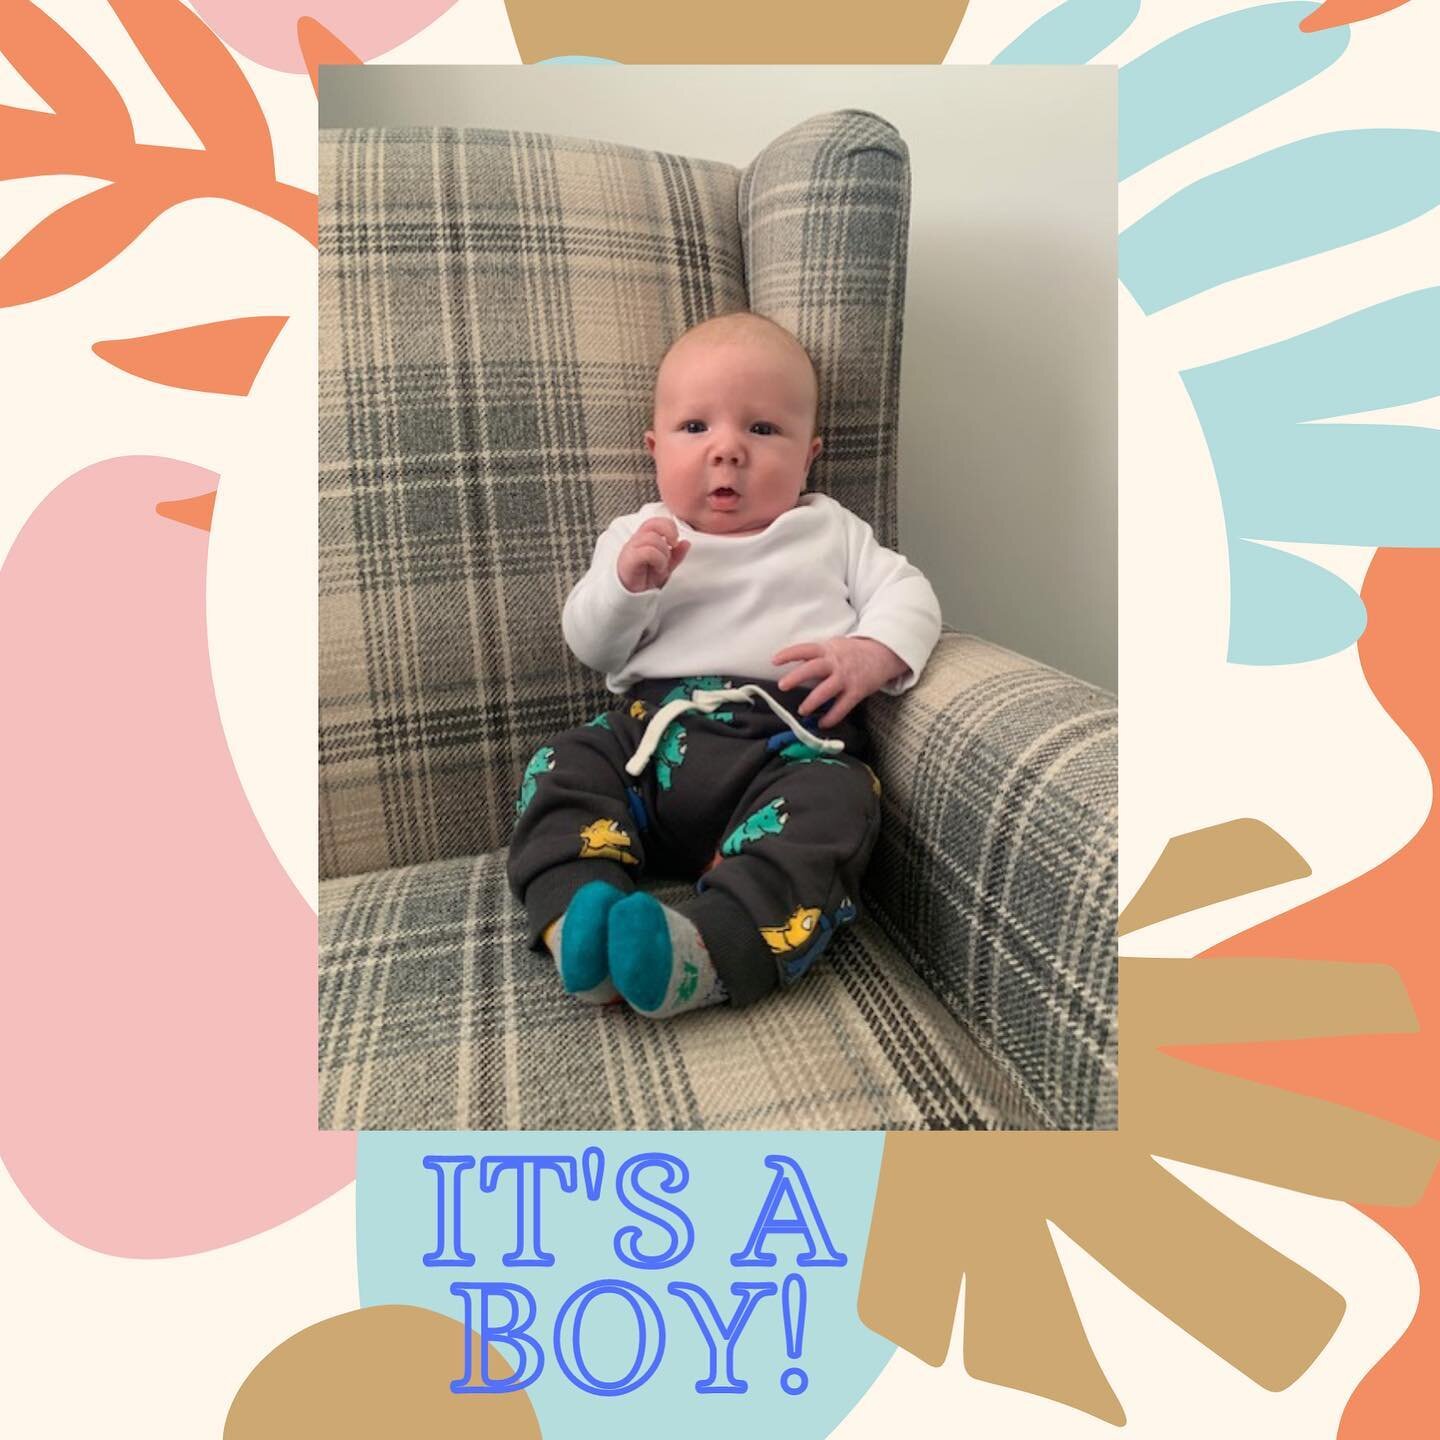 A huge congratulations to Lauren from our Lothian Road practice who has recently had a baby boy!!! 🌟🌟🌟 How gorgeous is baby Finlay born June 1st 2021!! 
Sending lots of love and well wishes to mum Lauren and baby Finlay 💕💕

#scotland #baby #team